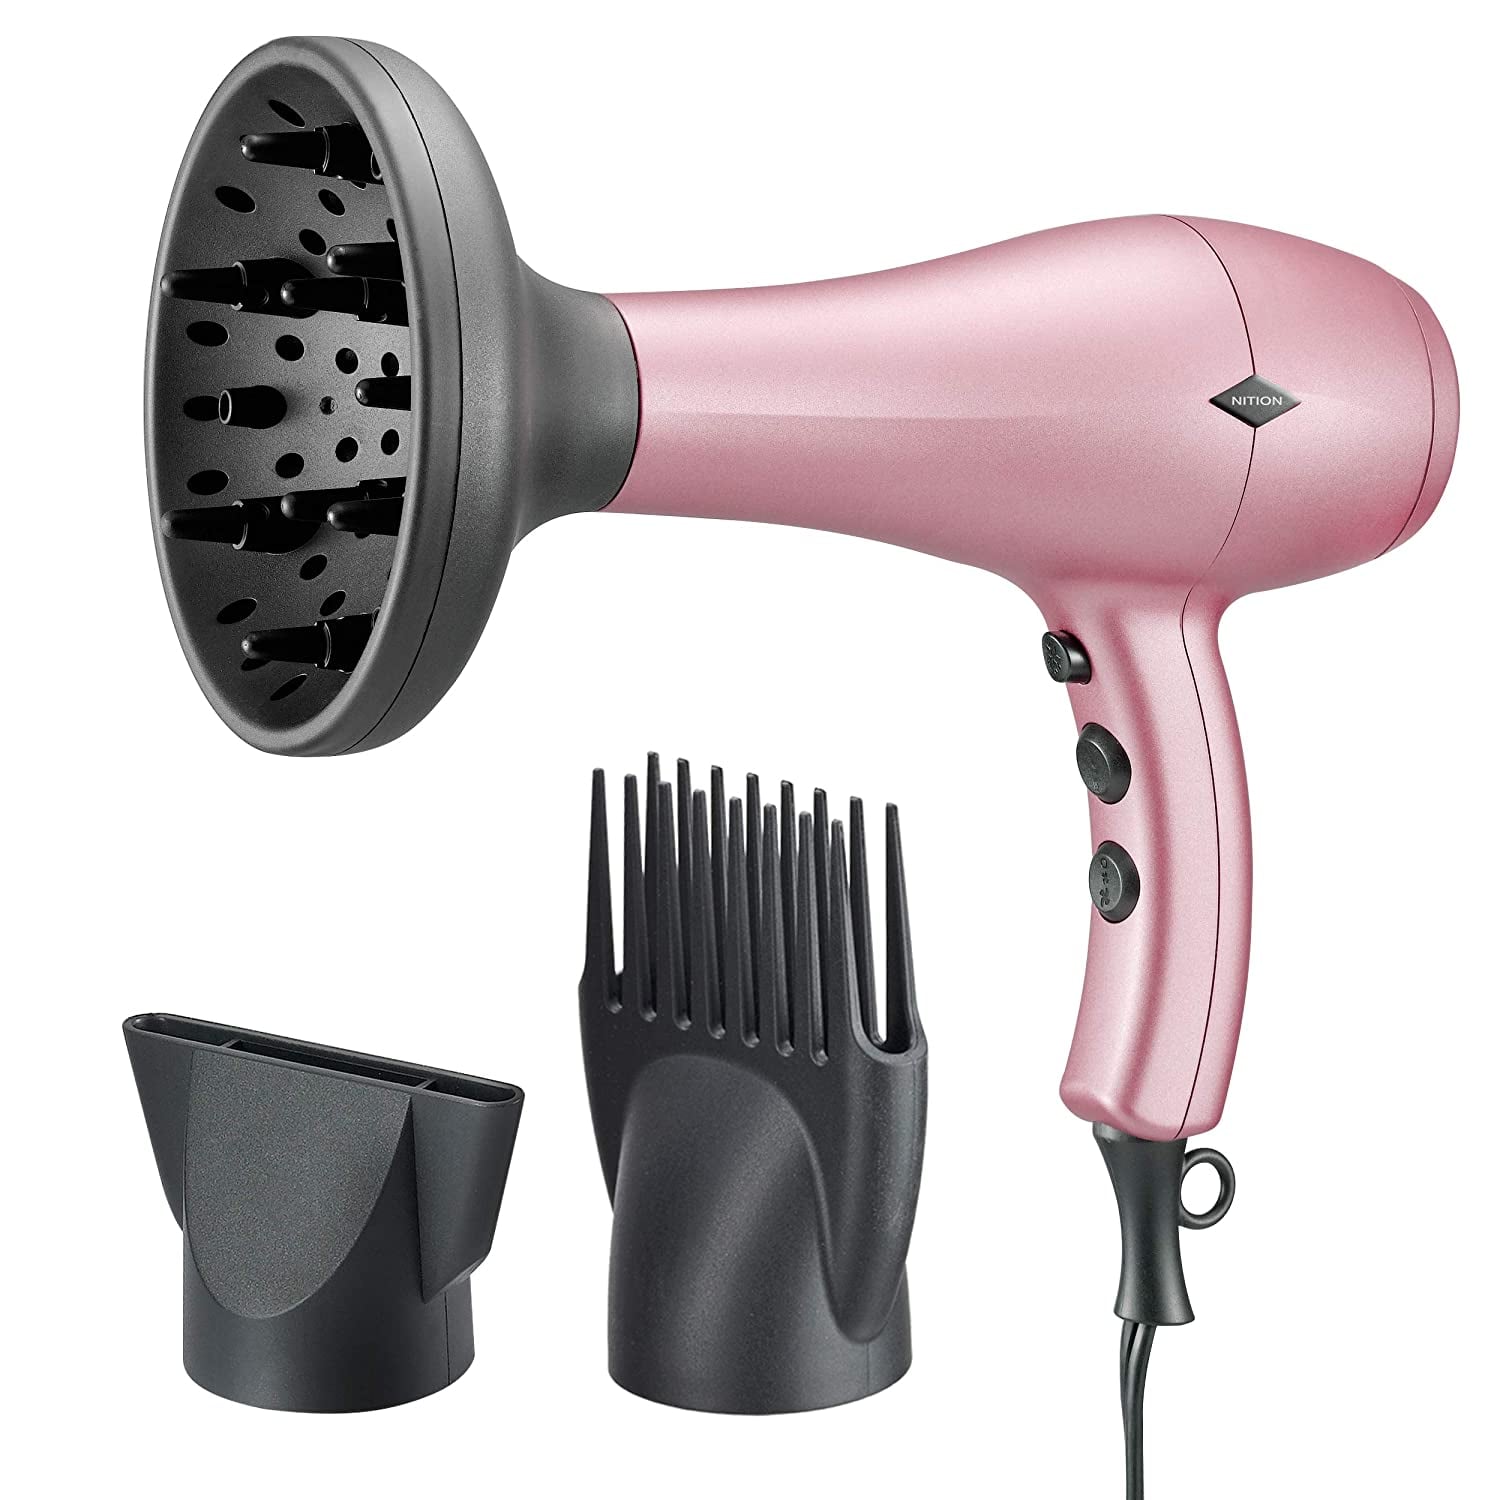 Livlig acceptere over What Do the Different Attachments on Hair Dryers Do? | POPSUGAR Beauty